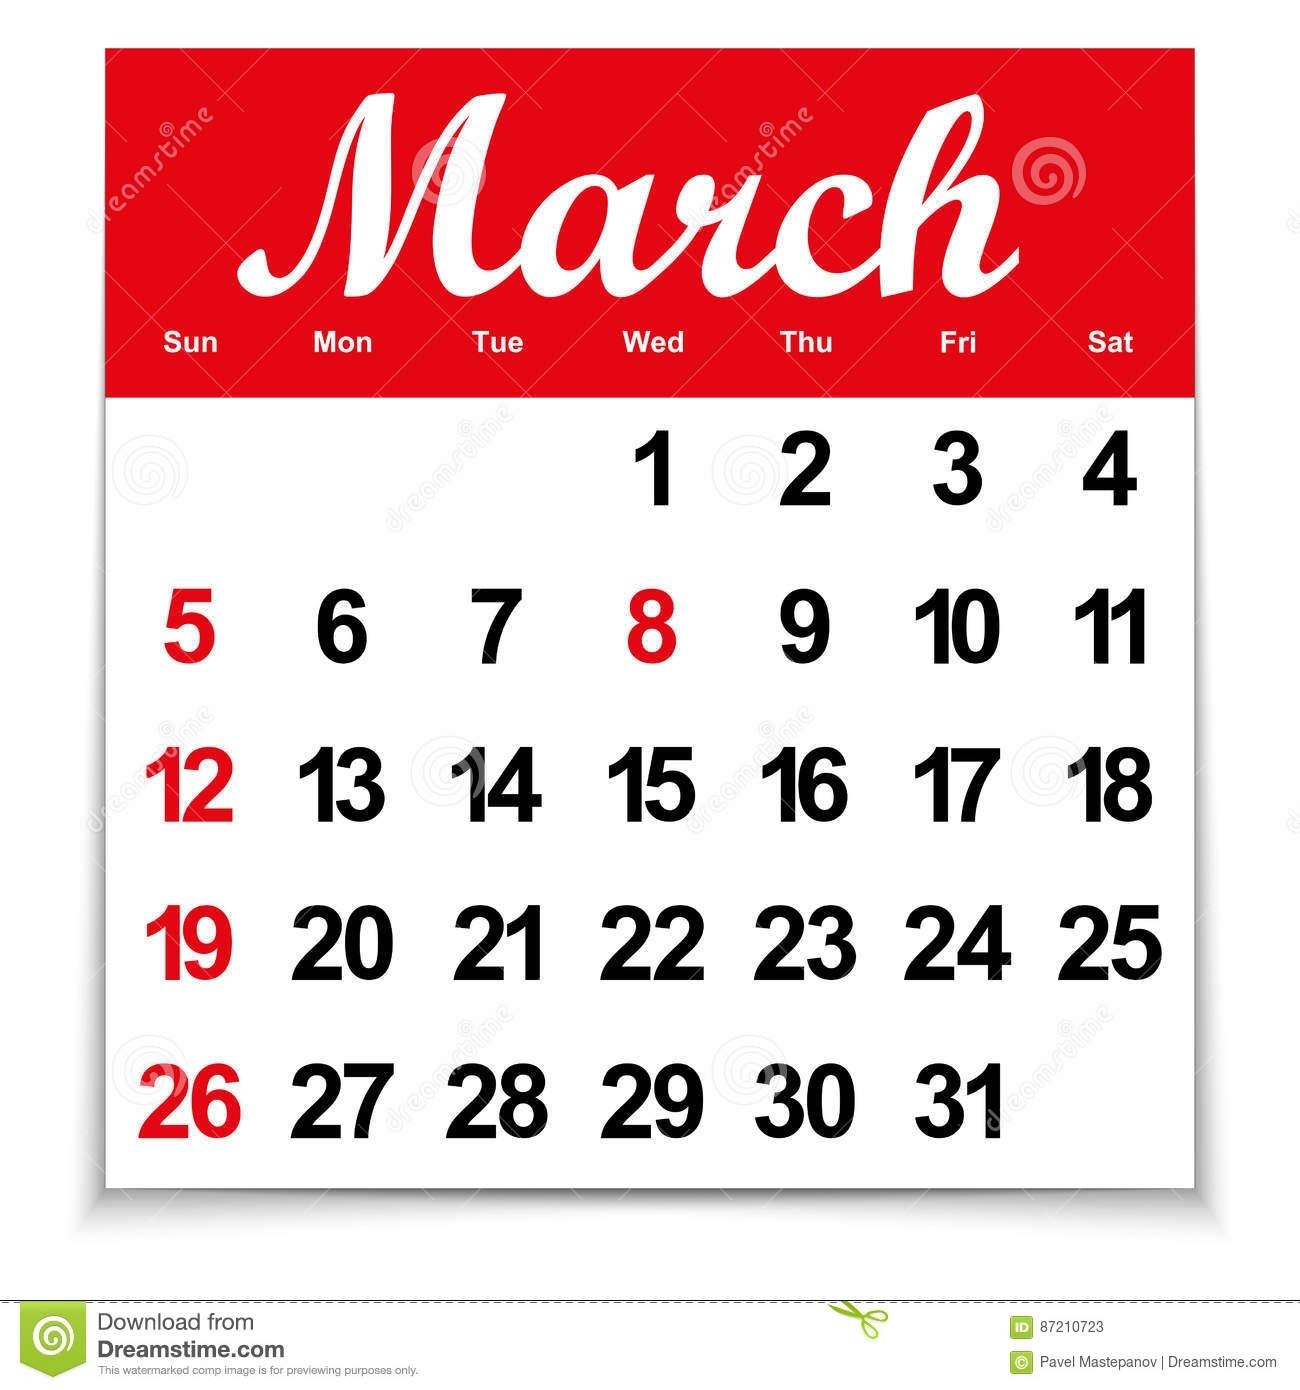 Calendar 2017 With The Month Of March Days Of The Week And Dates 1 Calendar Month Vs 30 Days